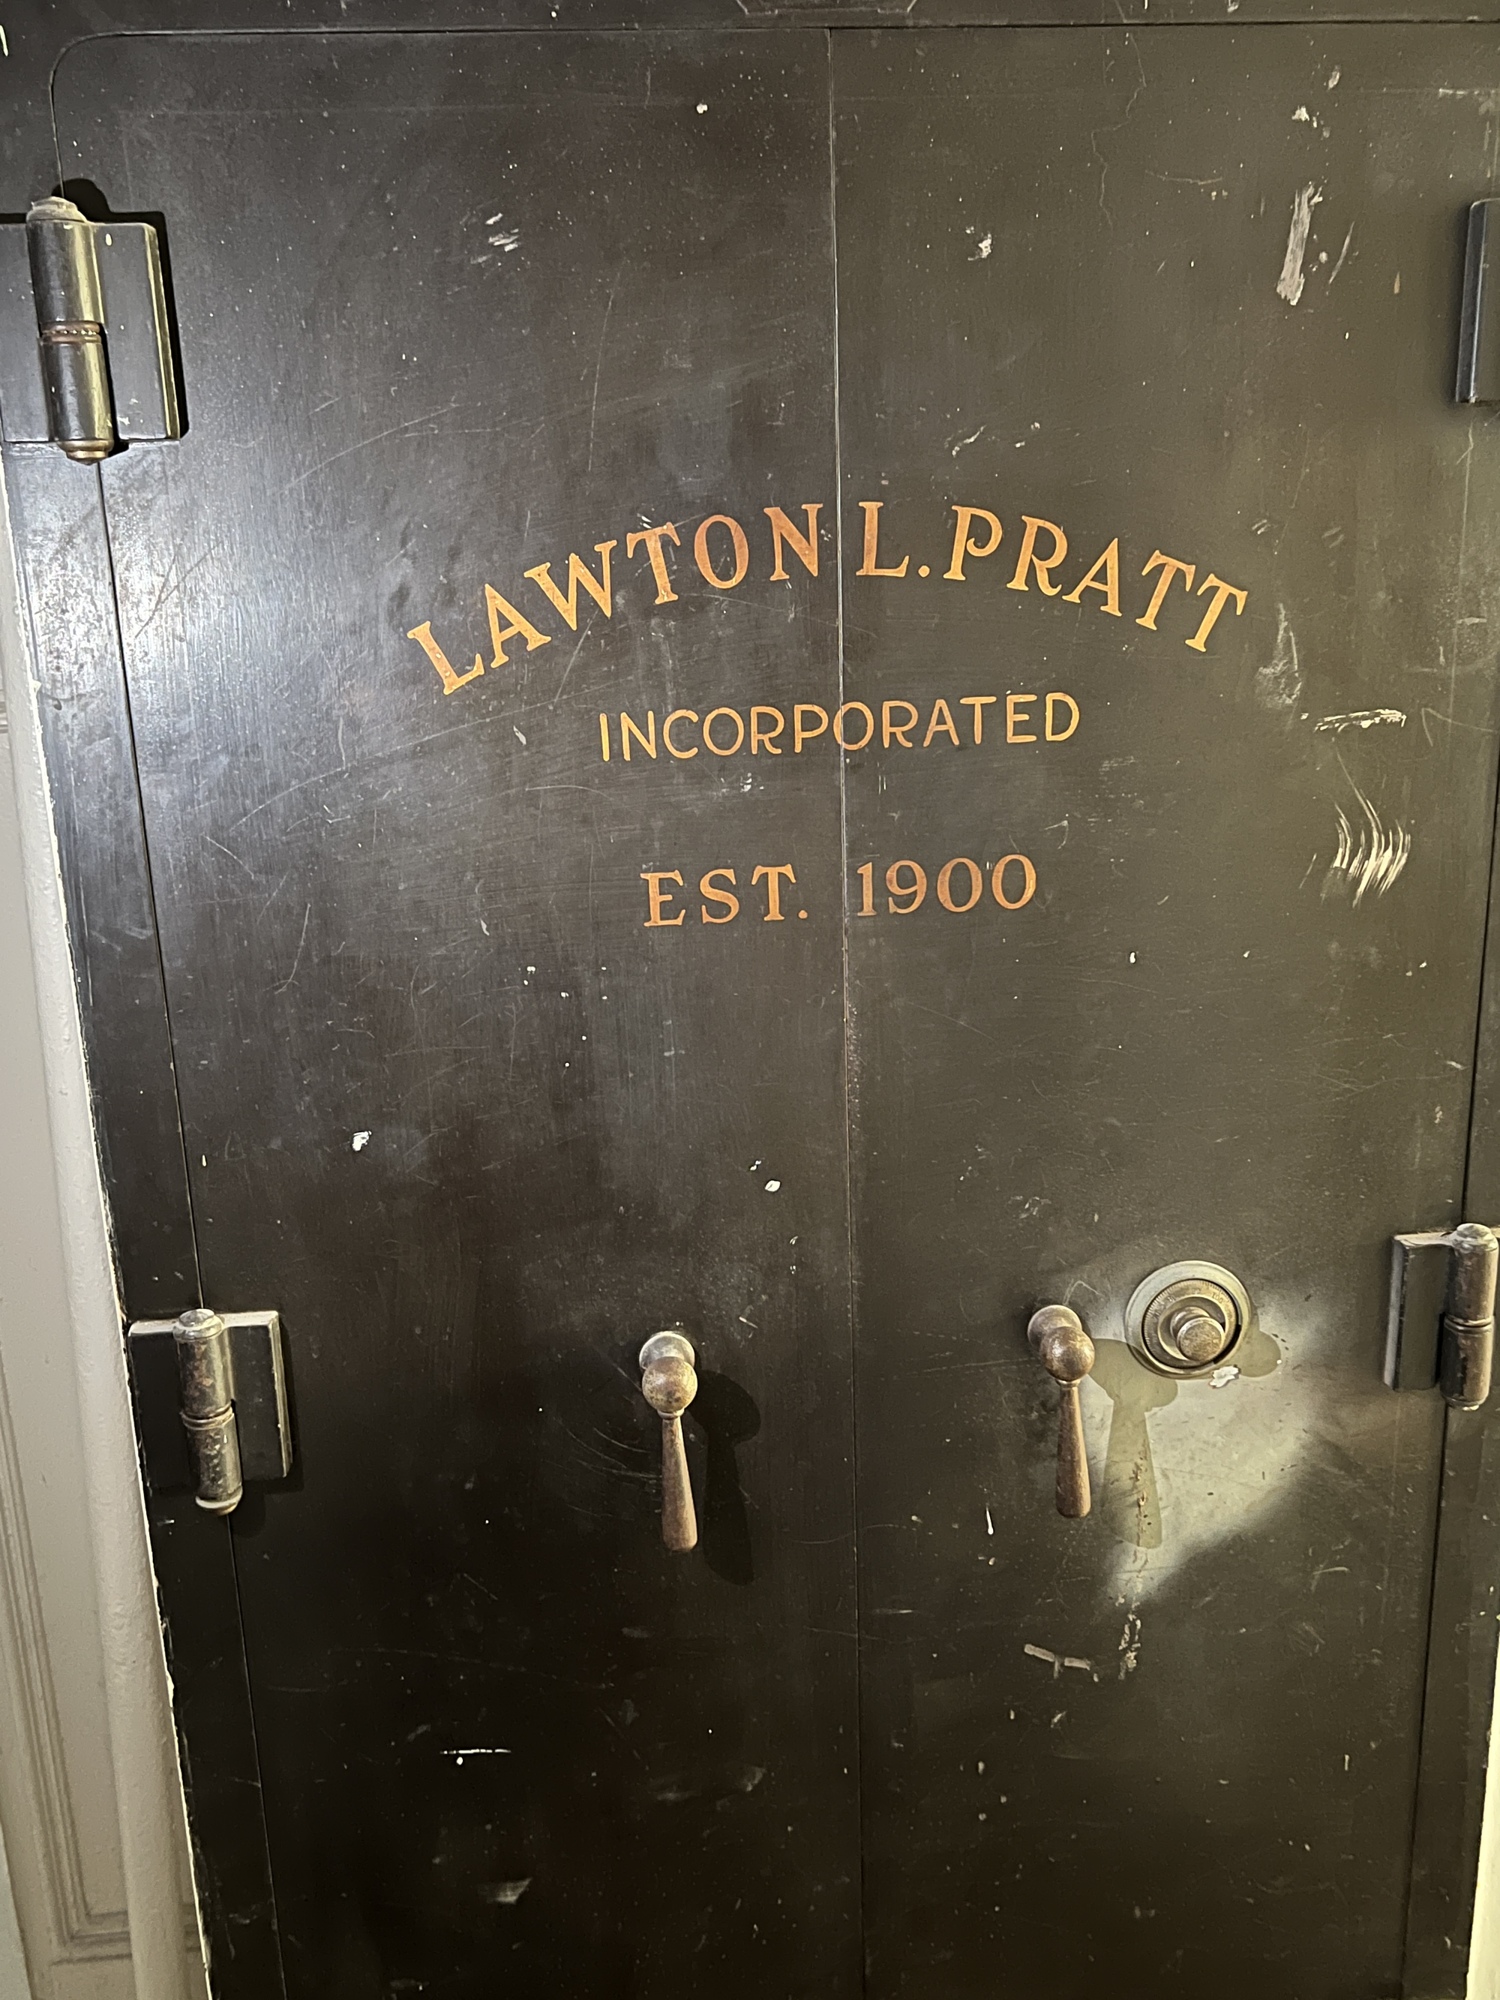 The safe remains inside the Pratt Funeral Home in LaVilla at 525 W. Beaver St. The new owner of the property wants to preserve this and other artifacts to decorate his proposed Airbnb.